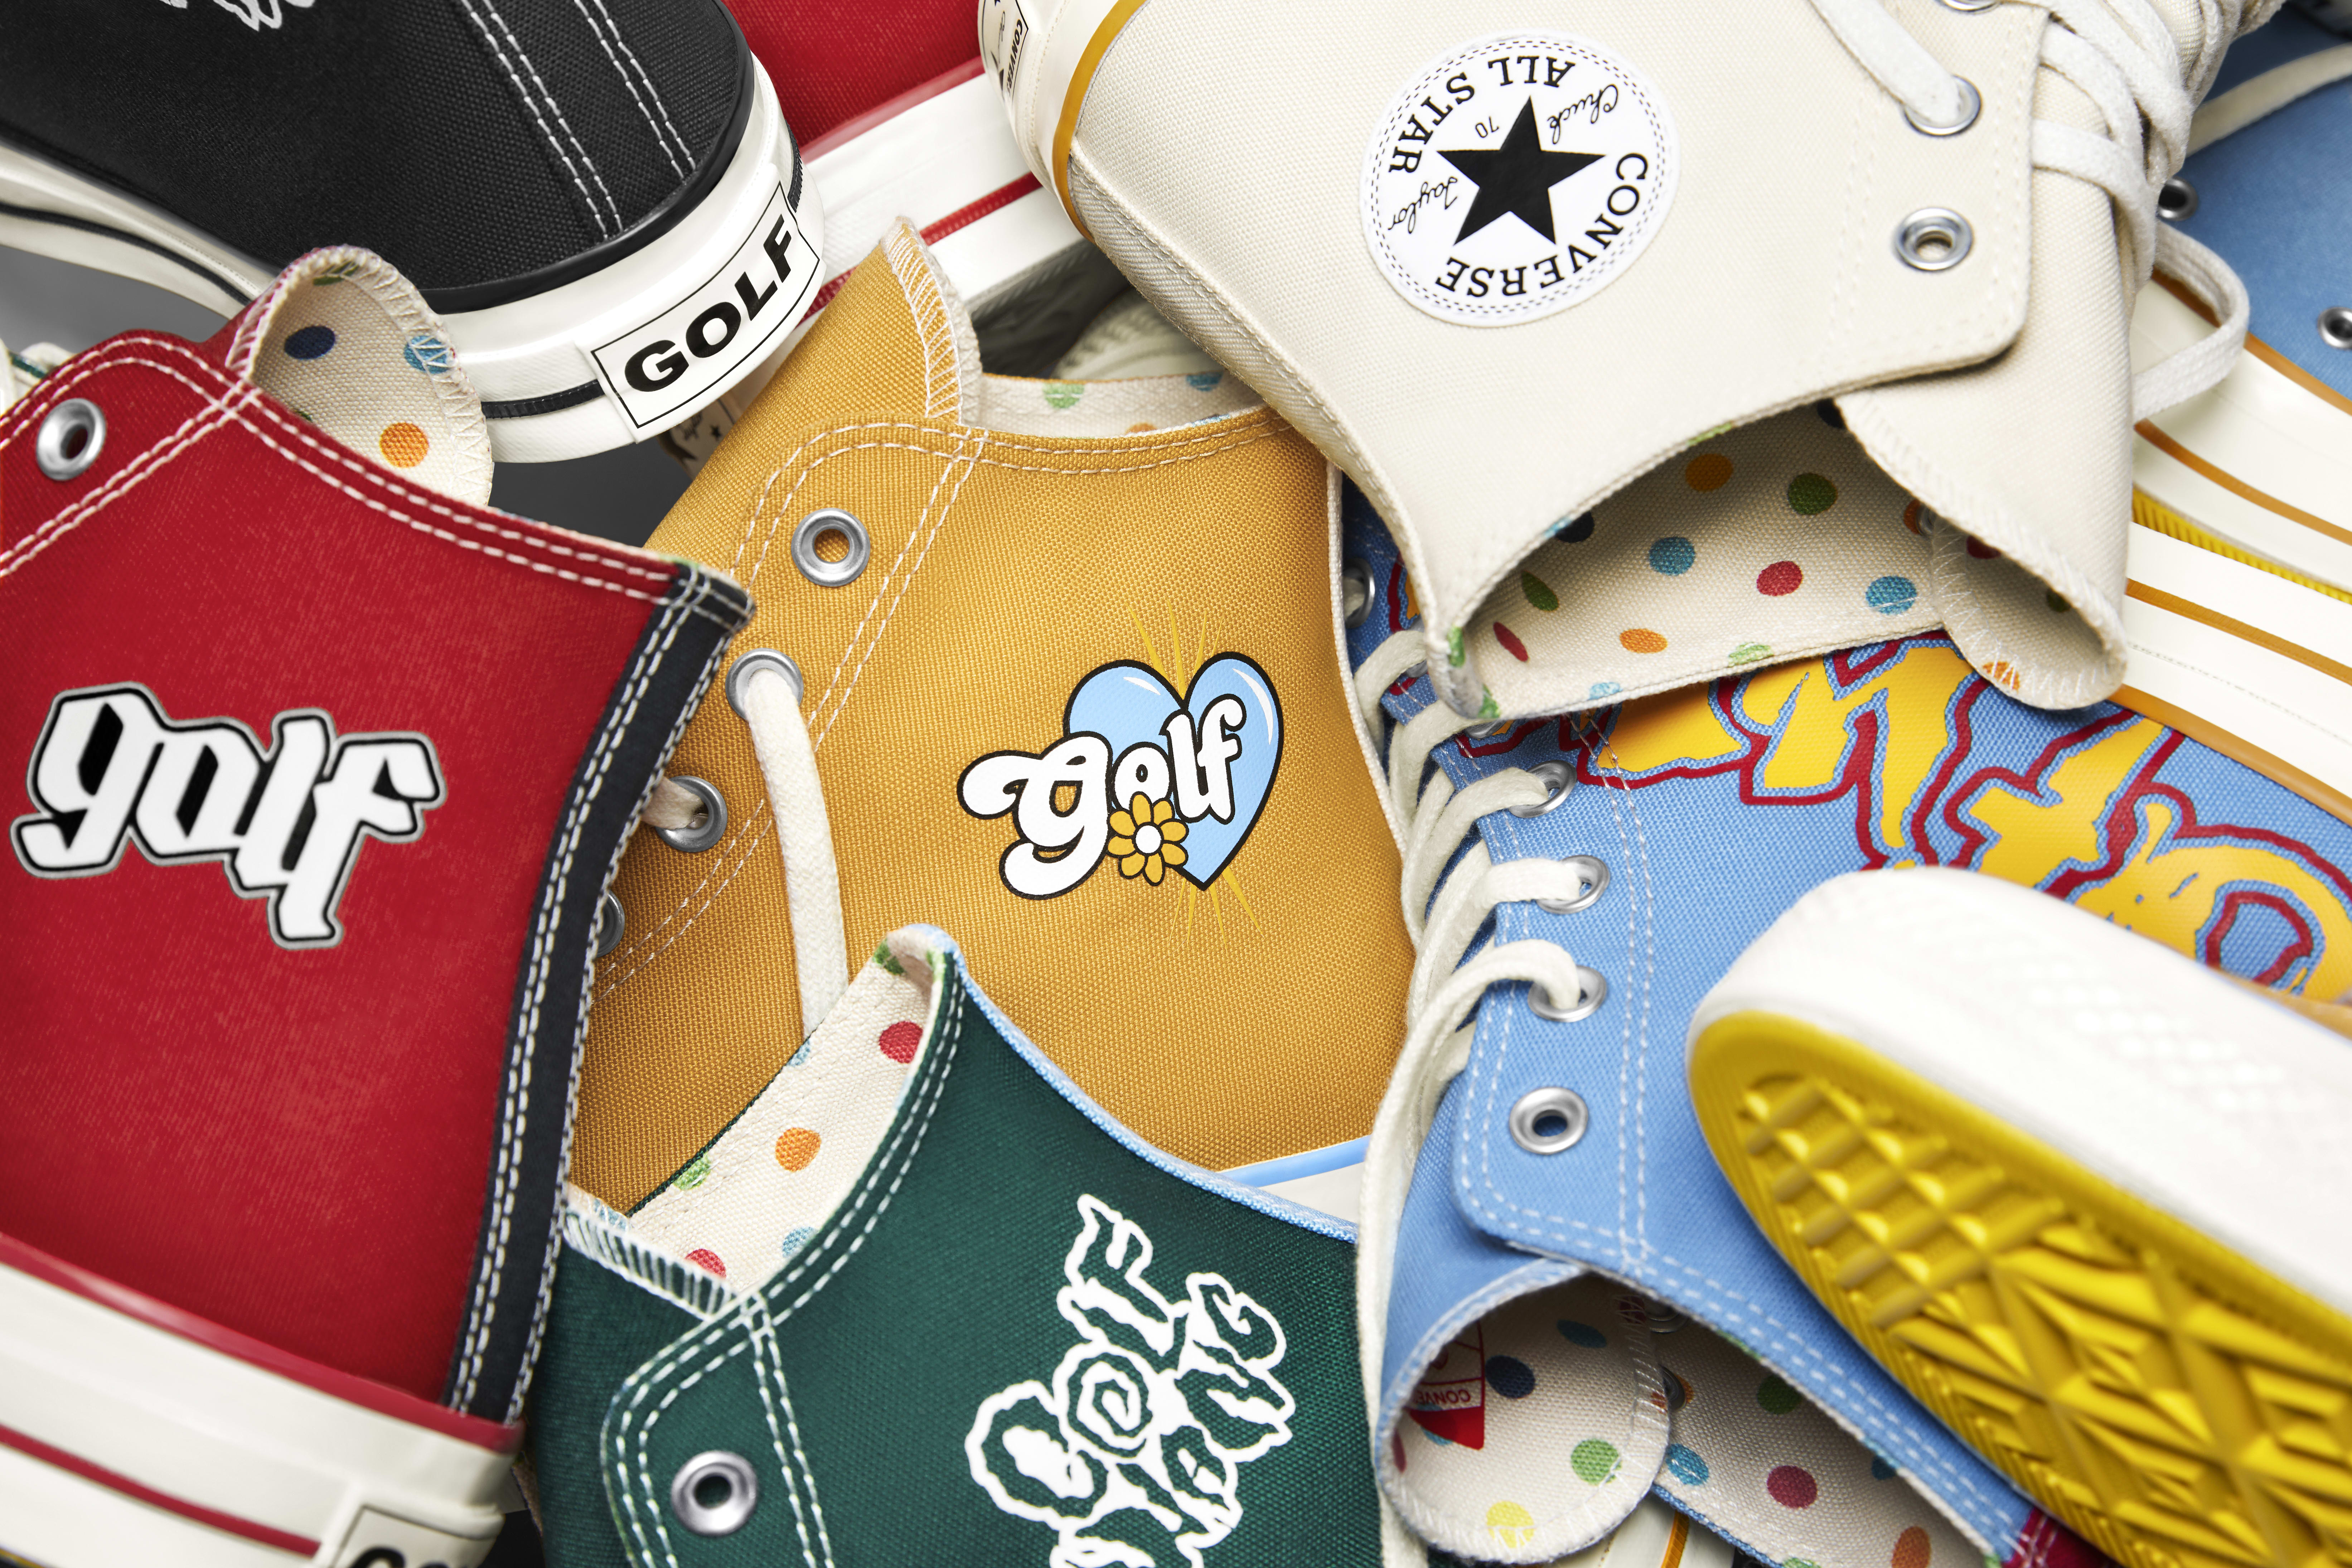 Tyler, the Creator Golf Wang x Converse Chuck 70 By You Release ... عروض النترا